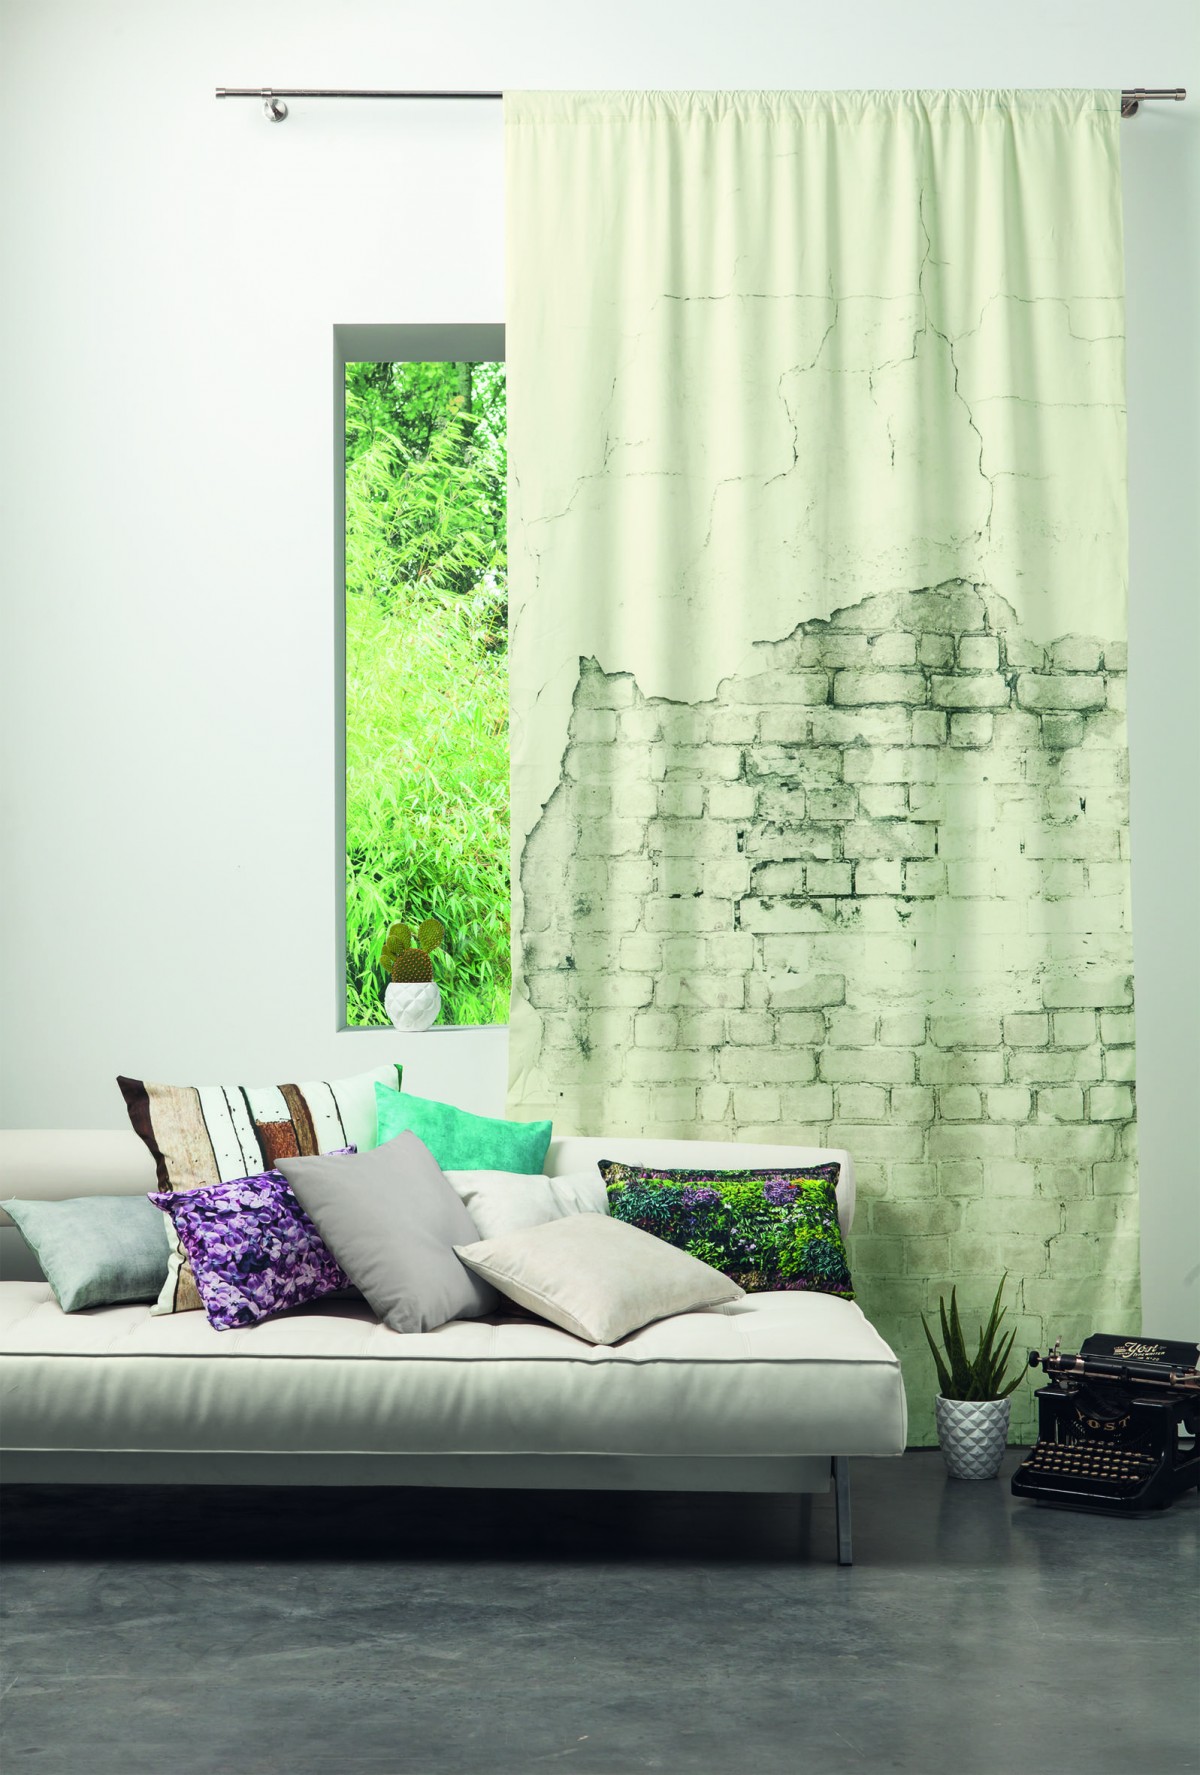 At home, closer to nature: The natural materials in textile decoration